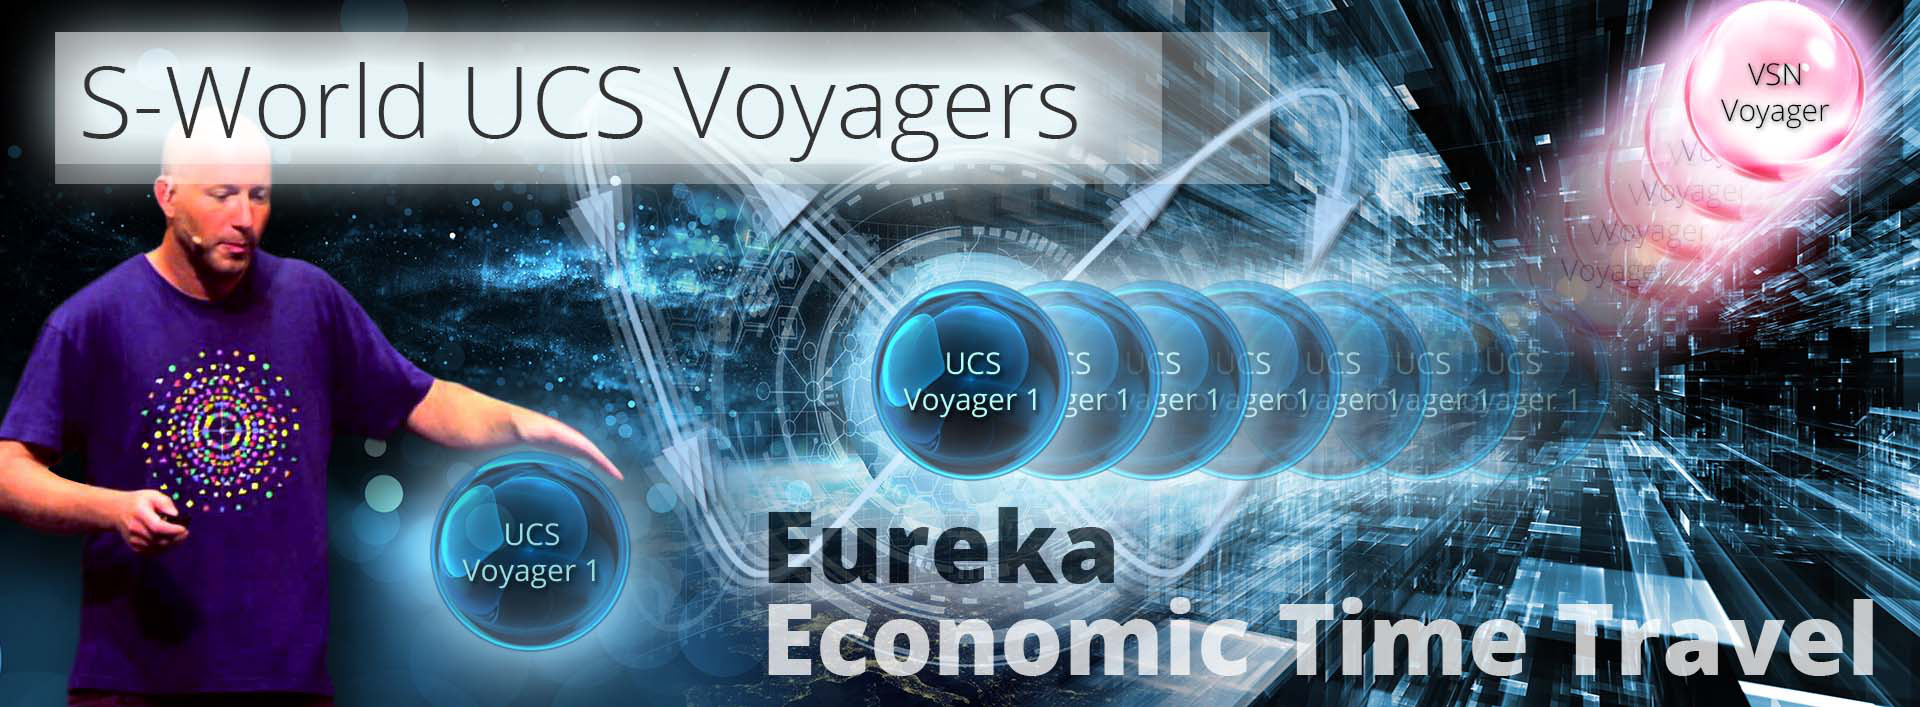 s-world ucs voyagers the economic theory of everything